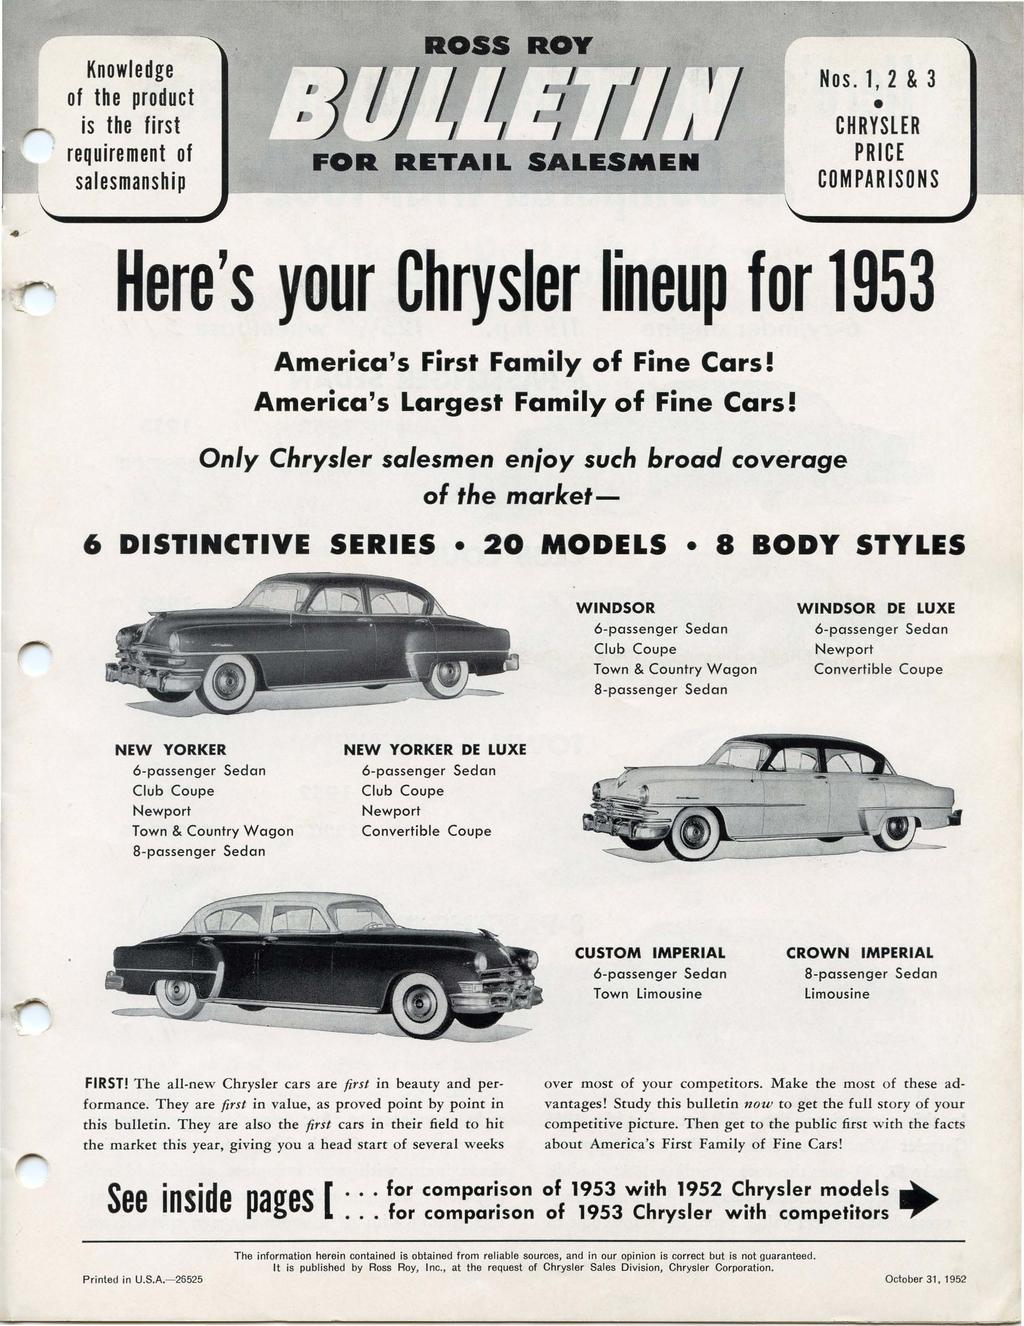 Knowledge of the product is the first requirement of salesmanship FOR RETAIL SALESMEN Nos. 1,2 & 3 CHRYSLER PRICE COMPARISONS Here's your lineup for America's First Family of Fine Cars!